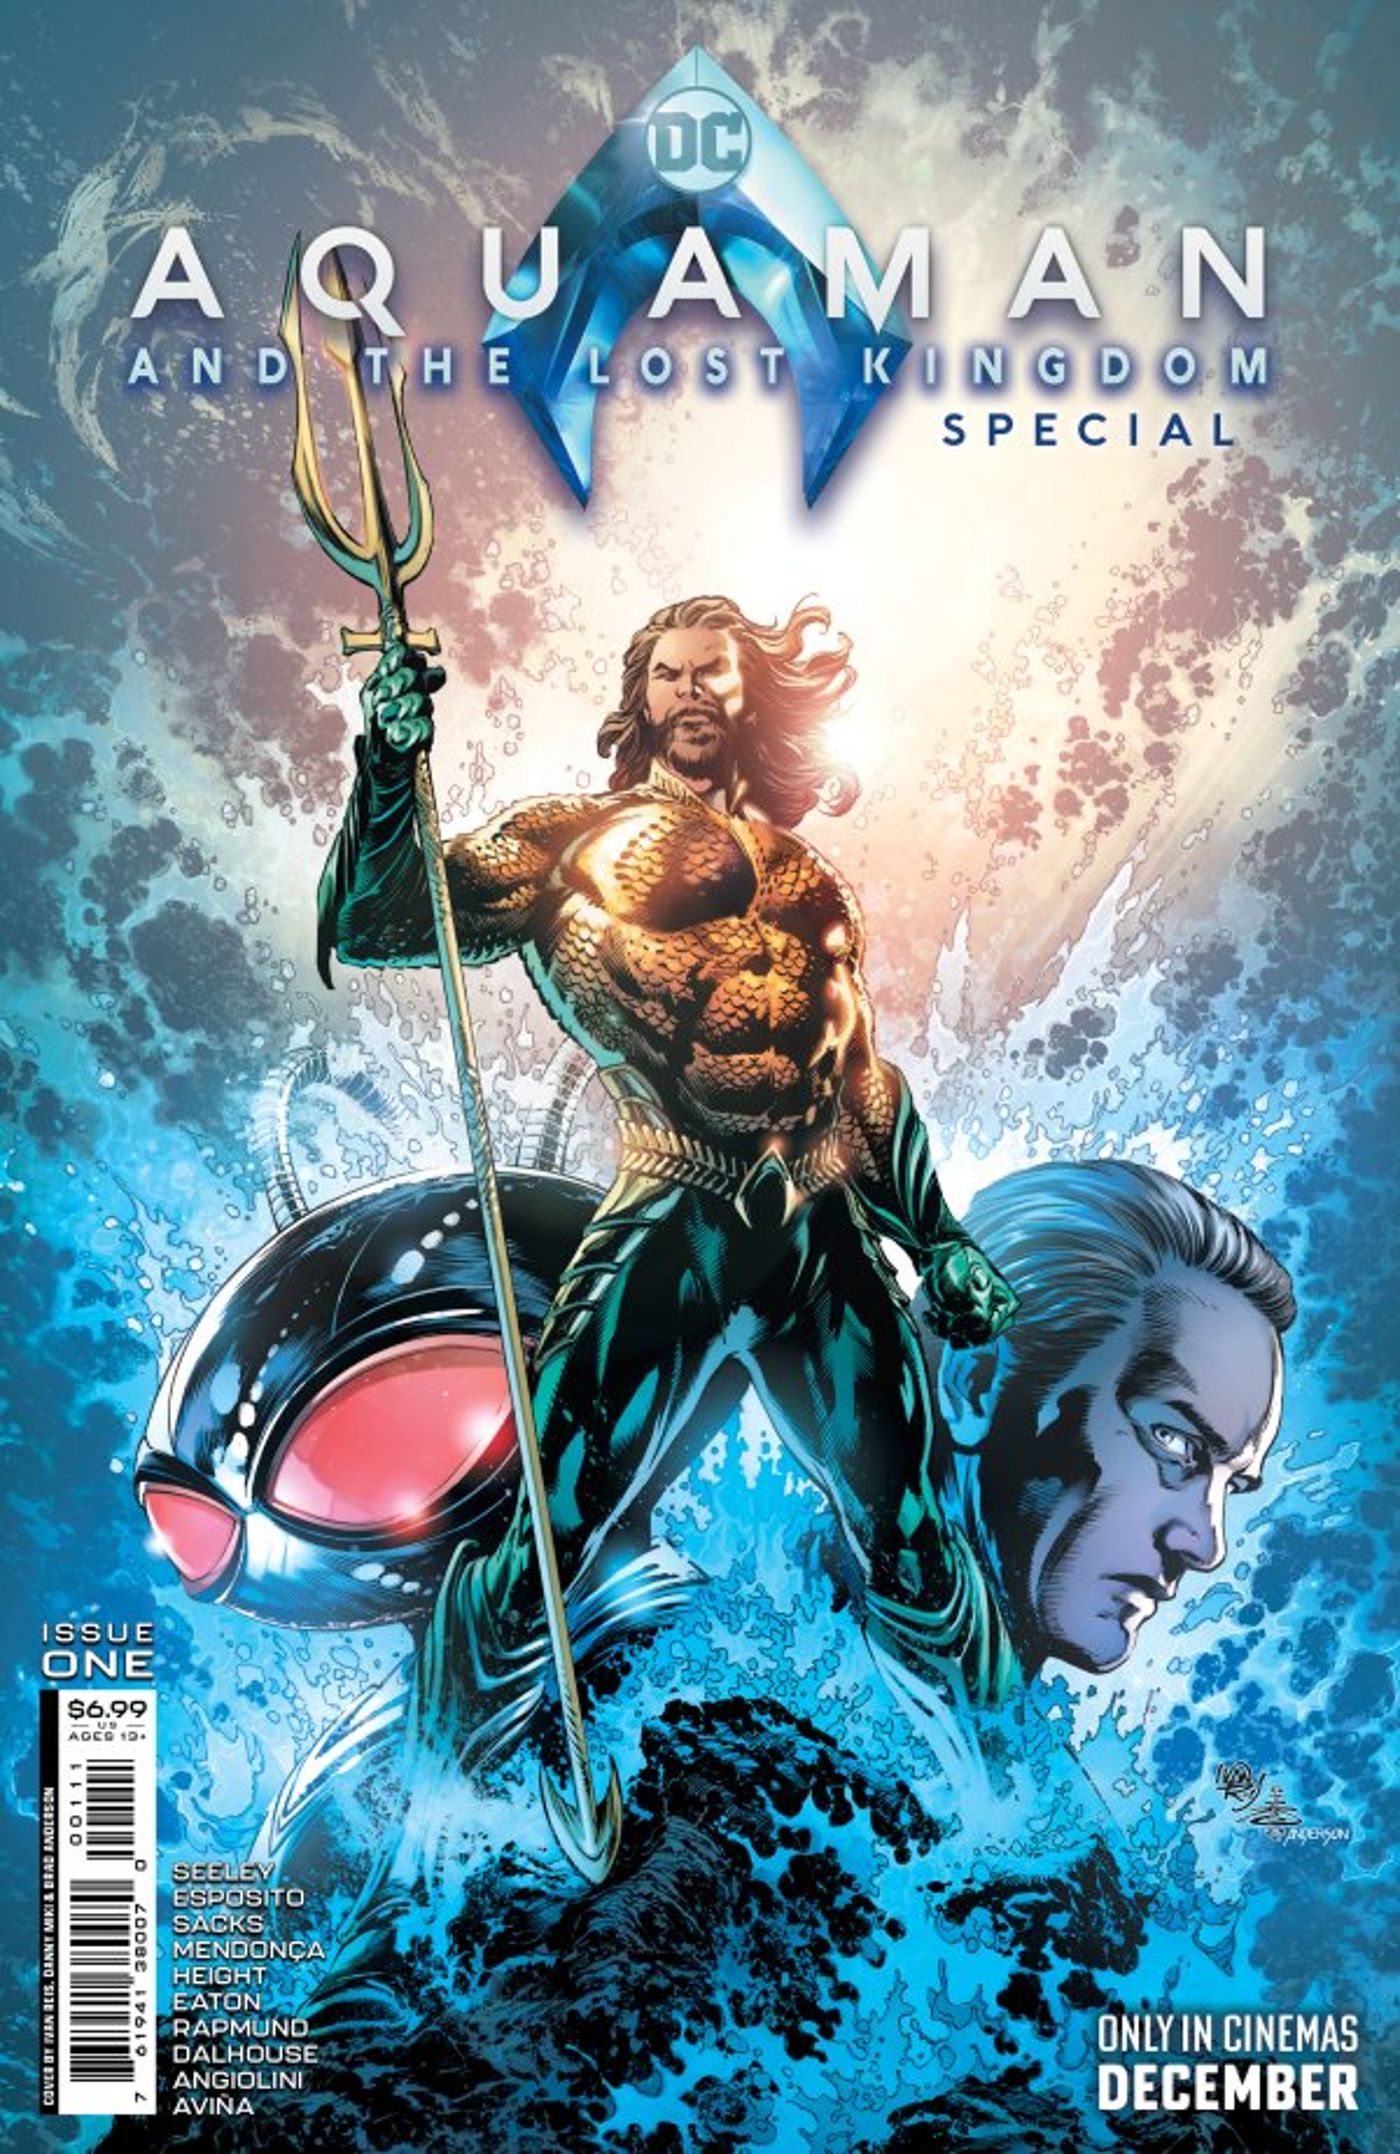 Aquaman & The Lost Kingdom Begins with Orm Desperate for Redemption